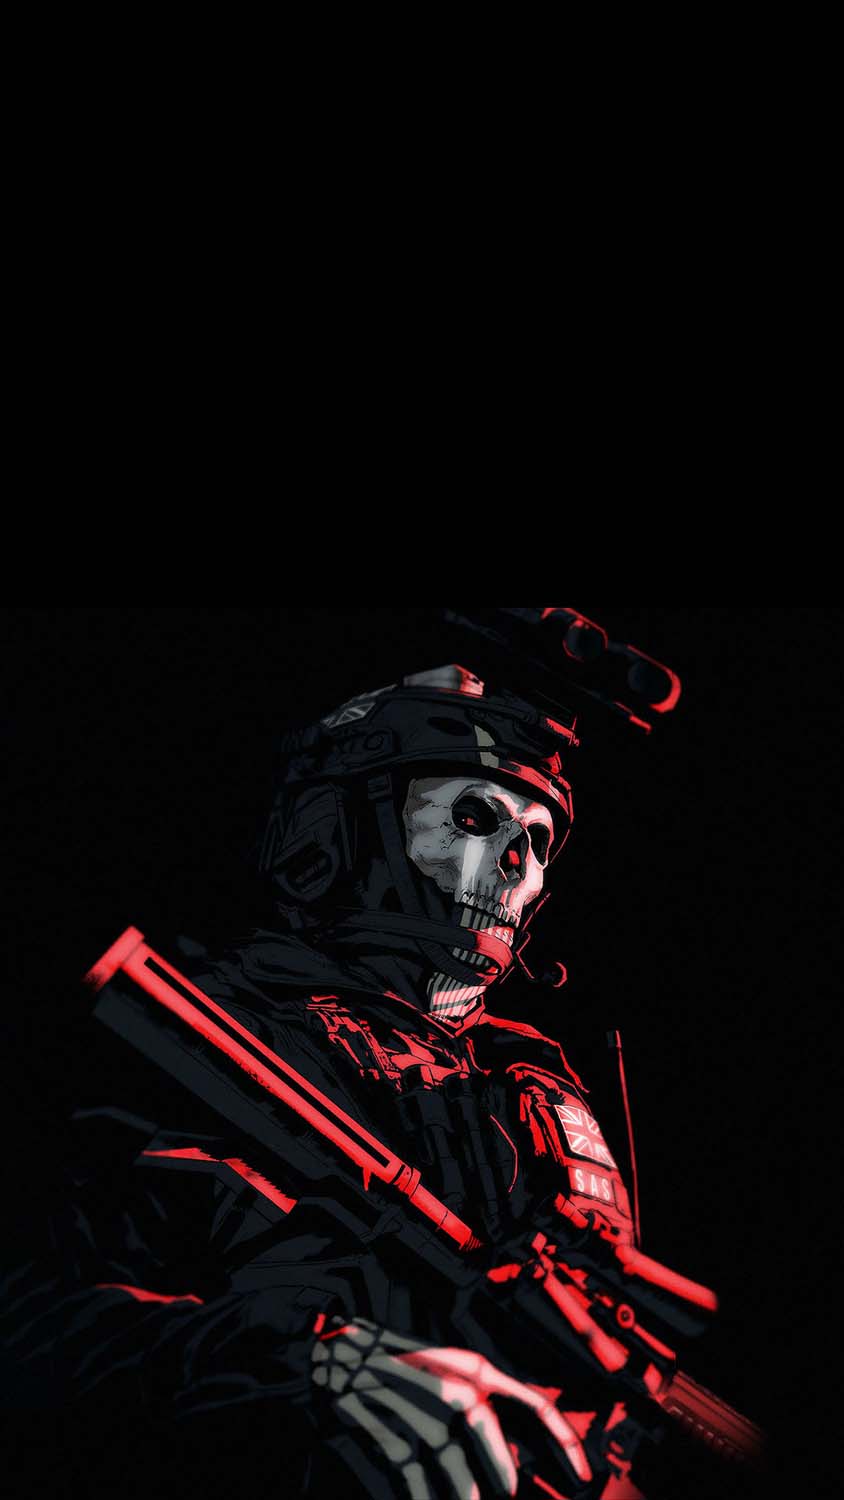 Ghost From Call Of Duty IPhone Wallpaper HD - IPhone Wallpapers : iPhone  Wallpapers